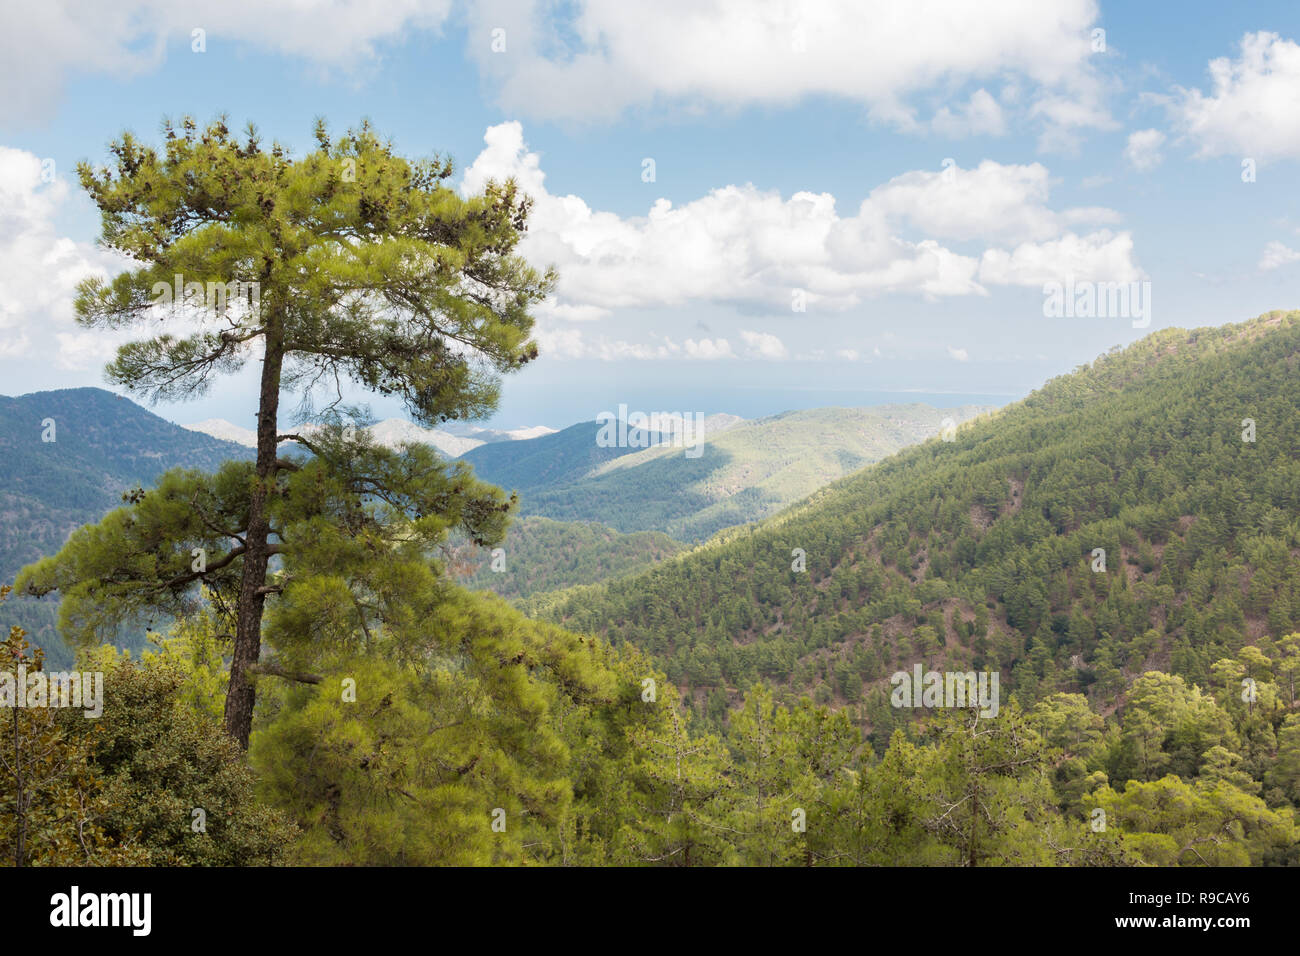 Black pine (Pinus nigra) growing in hilly landscape at Troodos mountains, Cyprus. Stock Photo